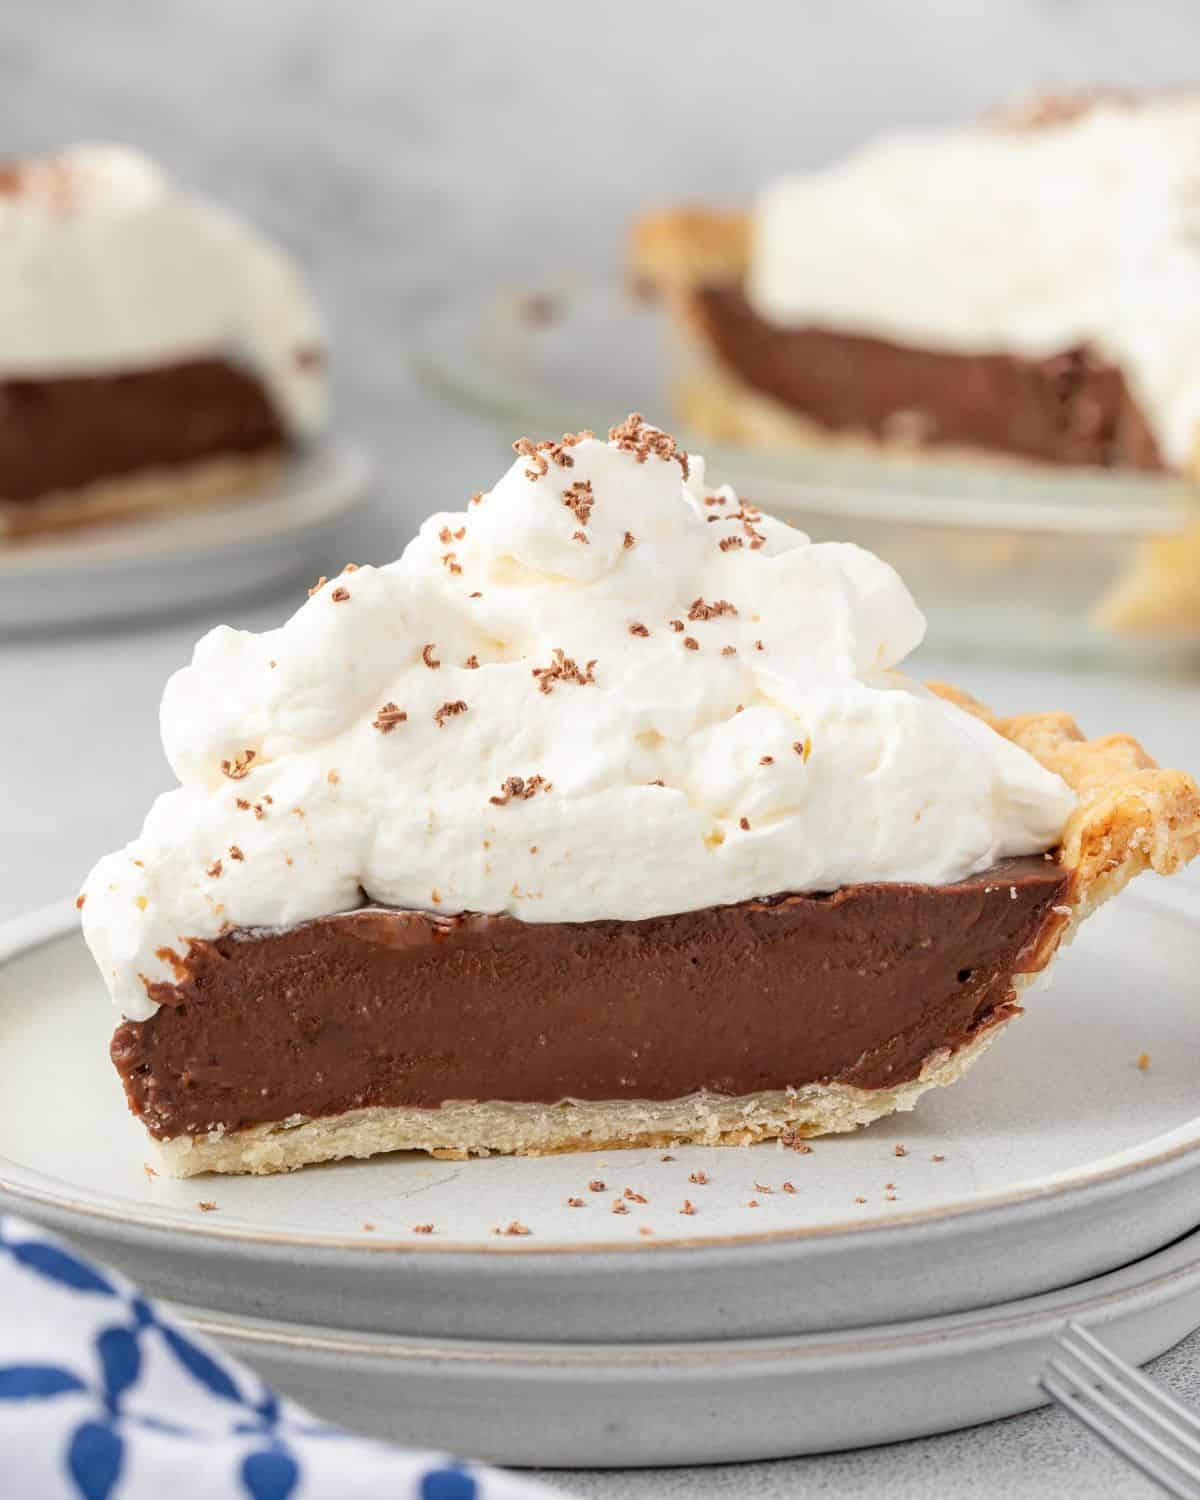 Slice af chocolate pie topped with whipped cream on a stack of plates.